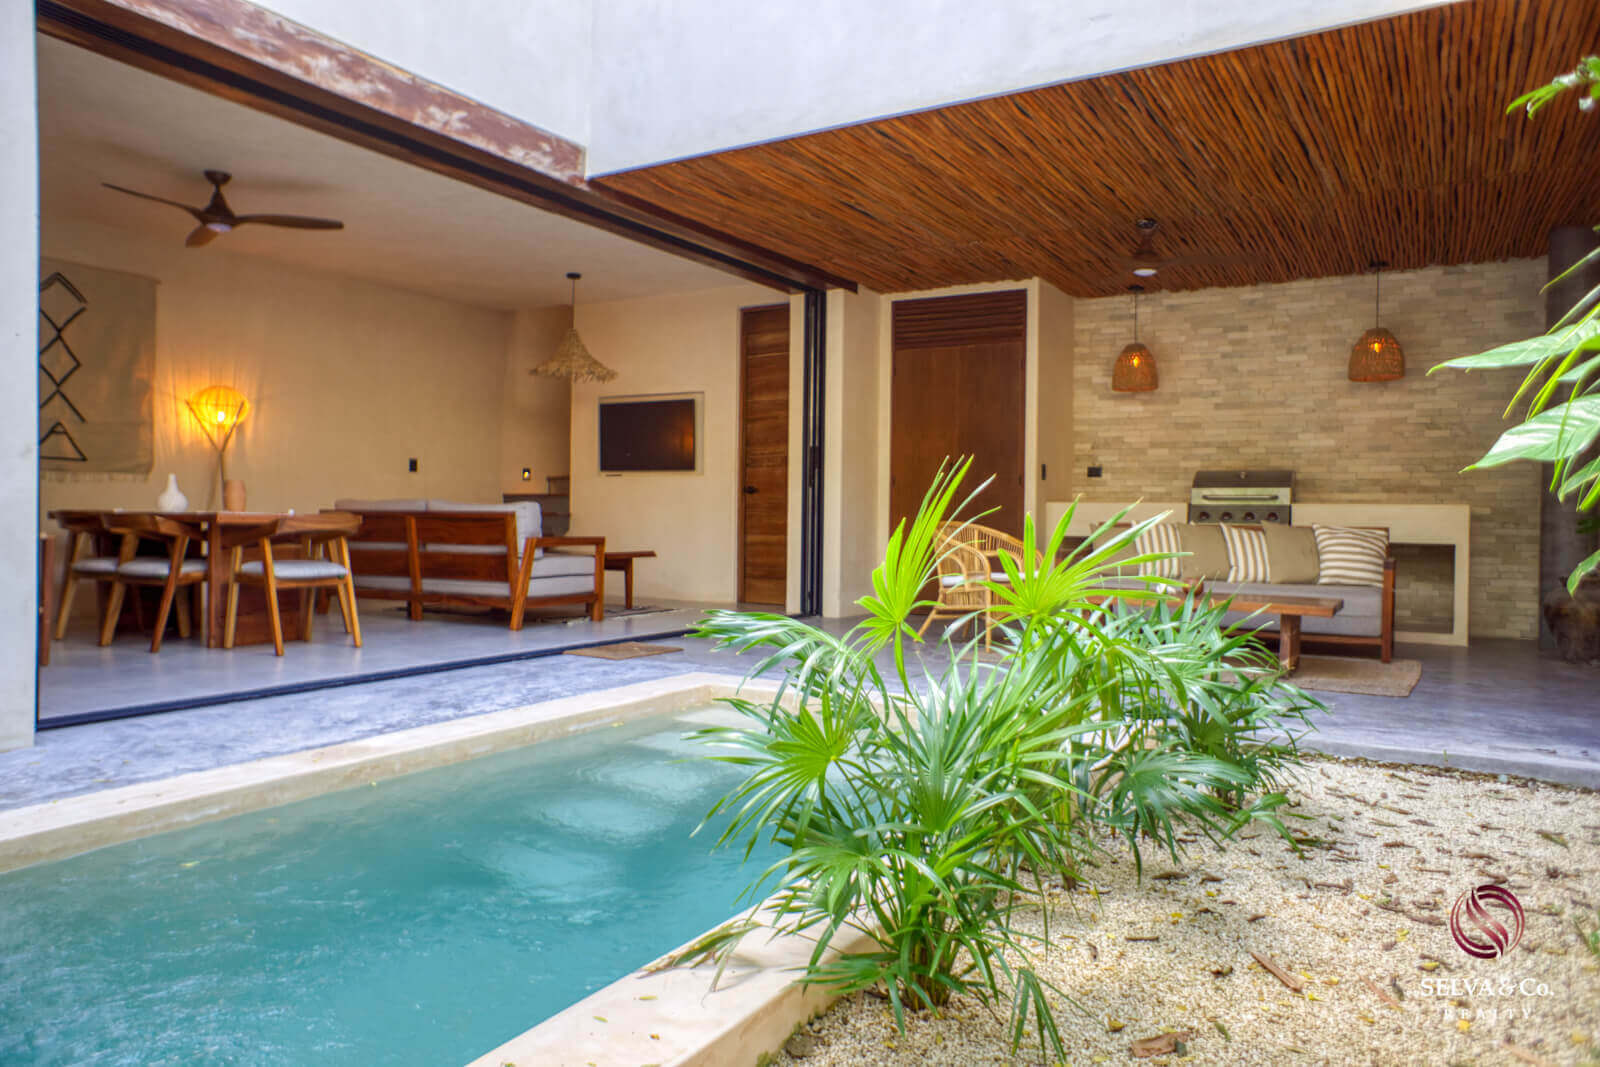 House in Tulum with jungle and ecological touch.